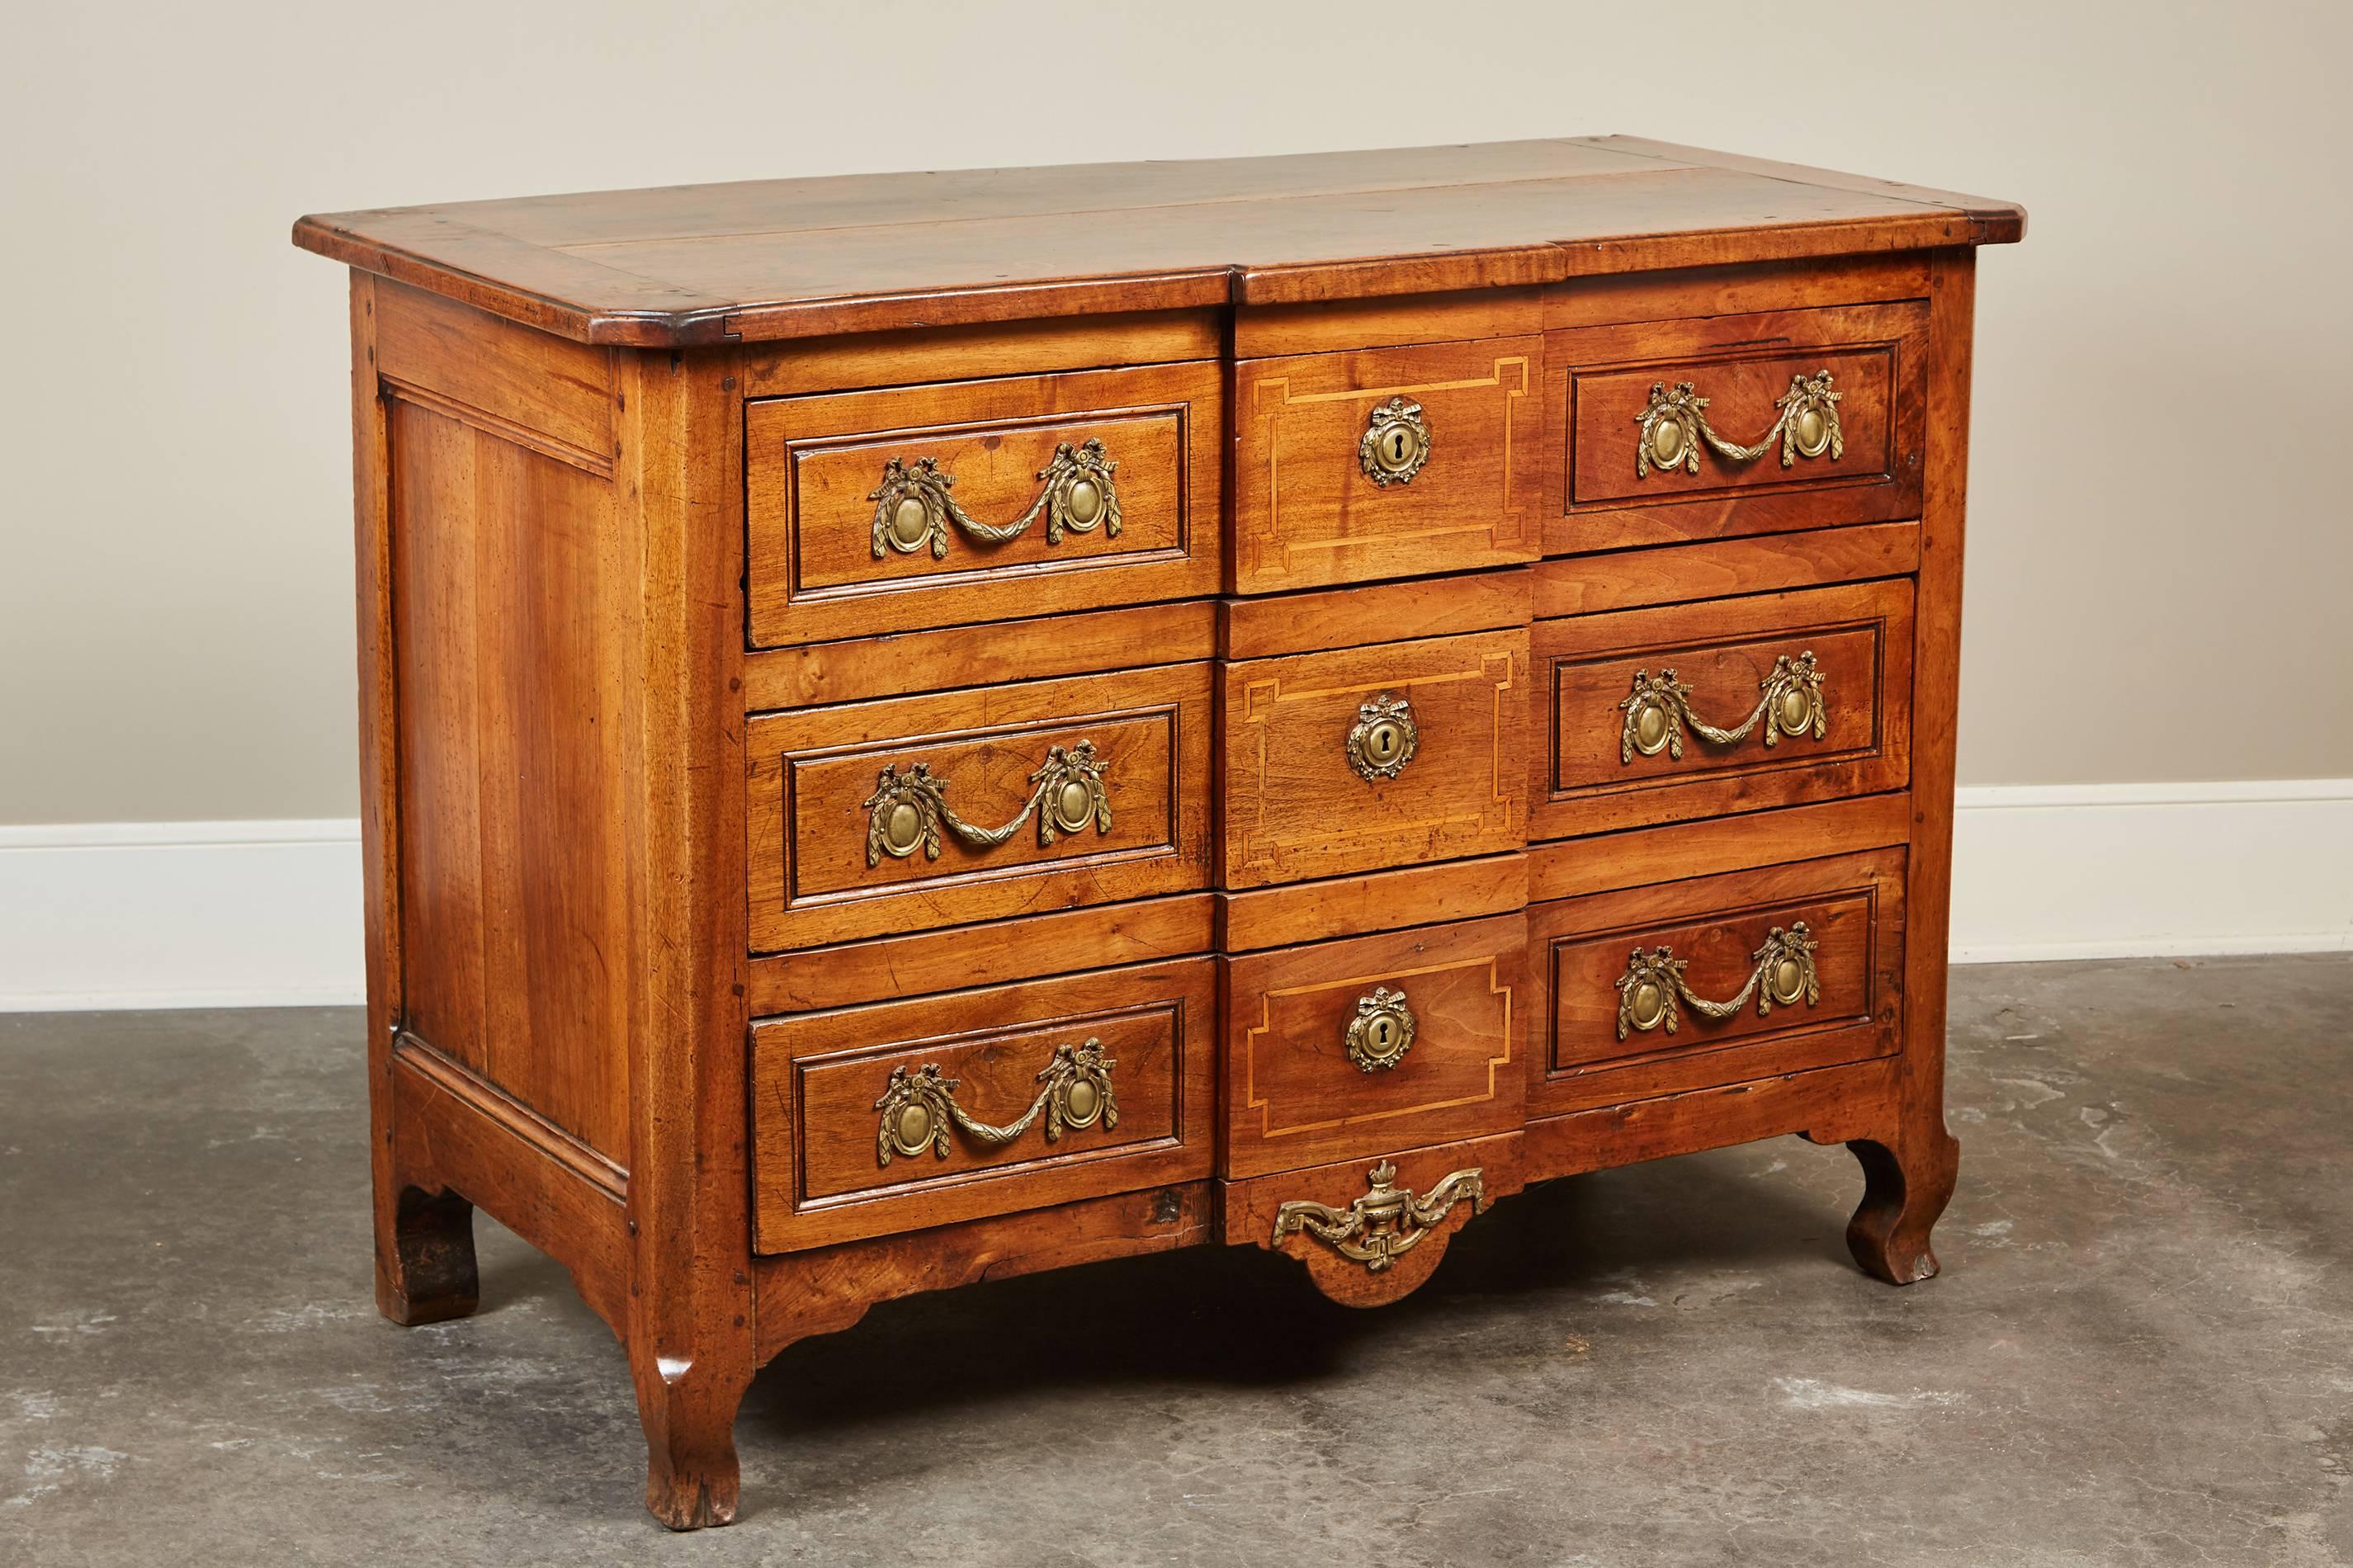 A remarkable 18th century French Louis XVI walnut chest of drawers of serpentine form and features six brass garland handles and three large drawers. 